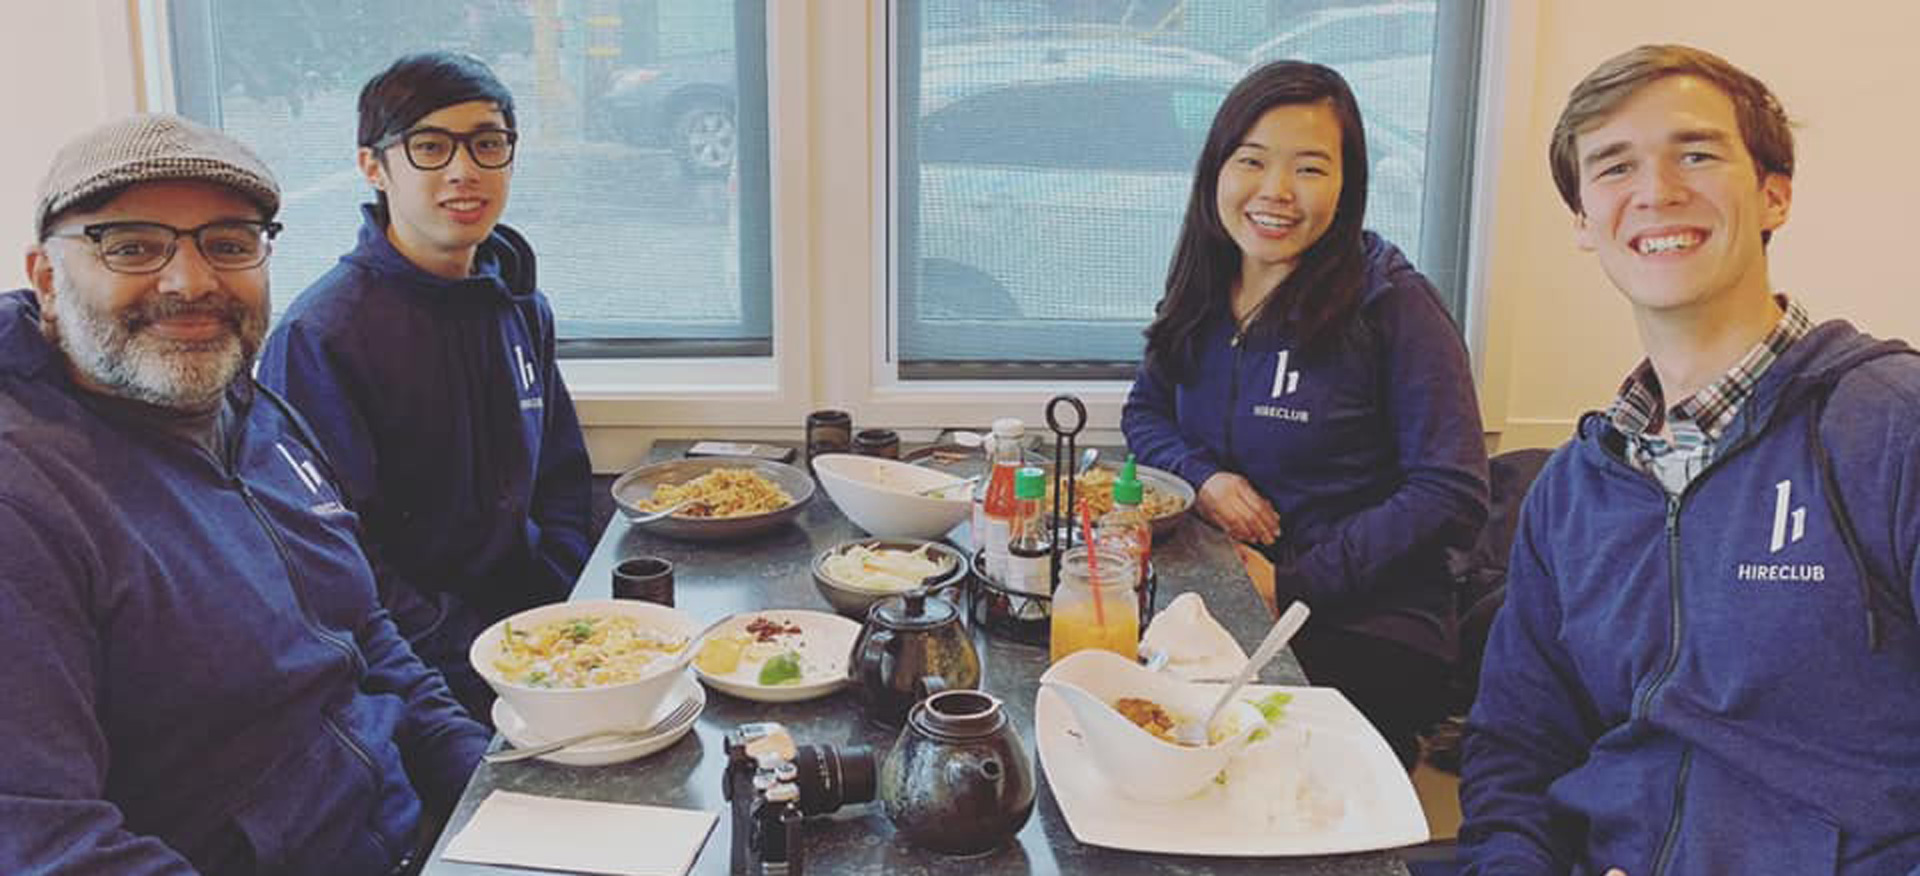 Team lunch at HireClub with logo-printed hoodies.